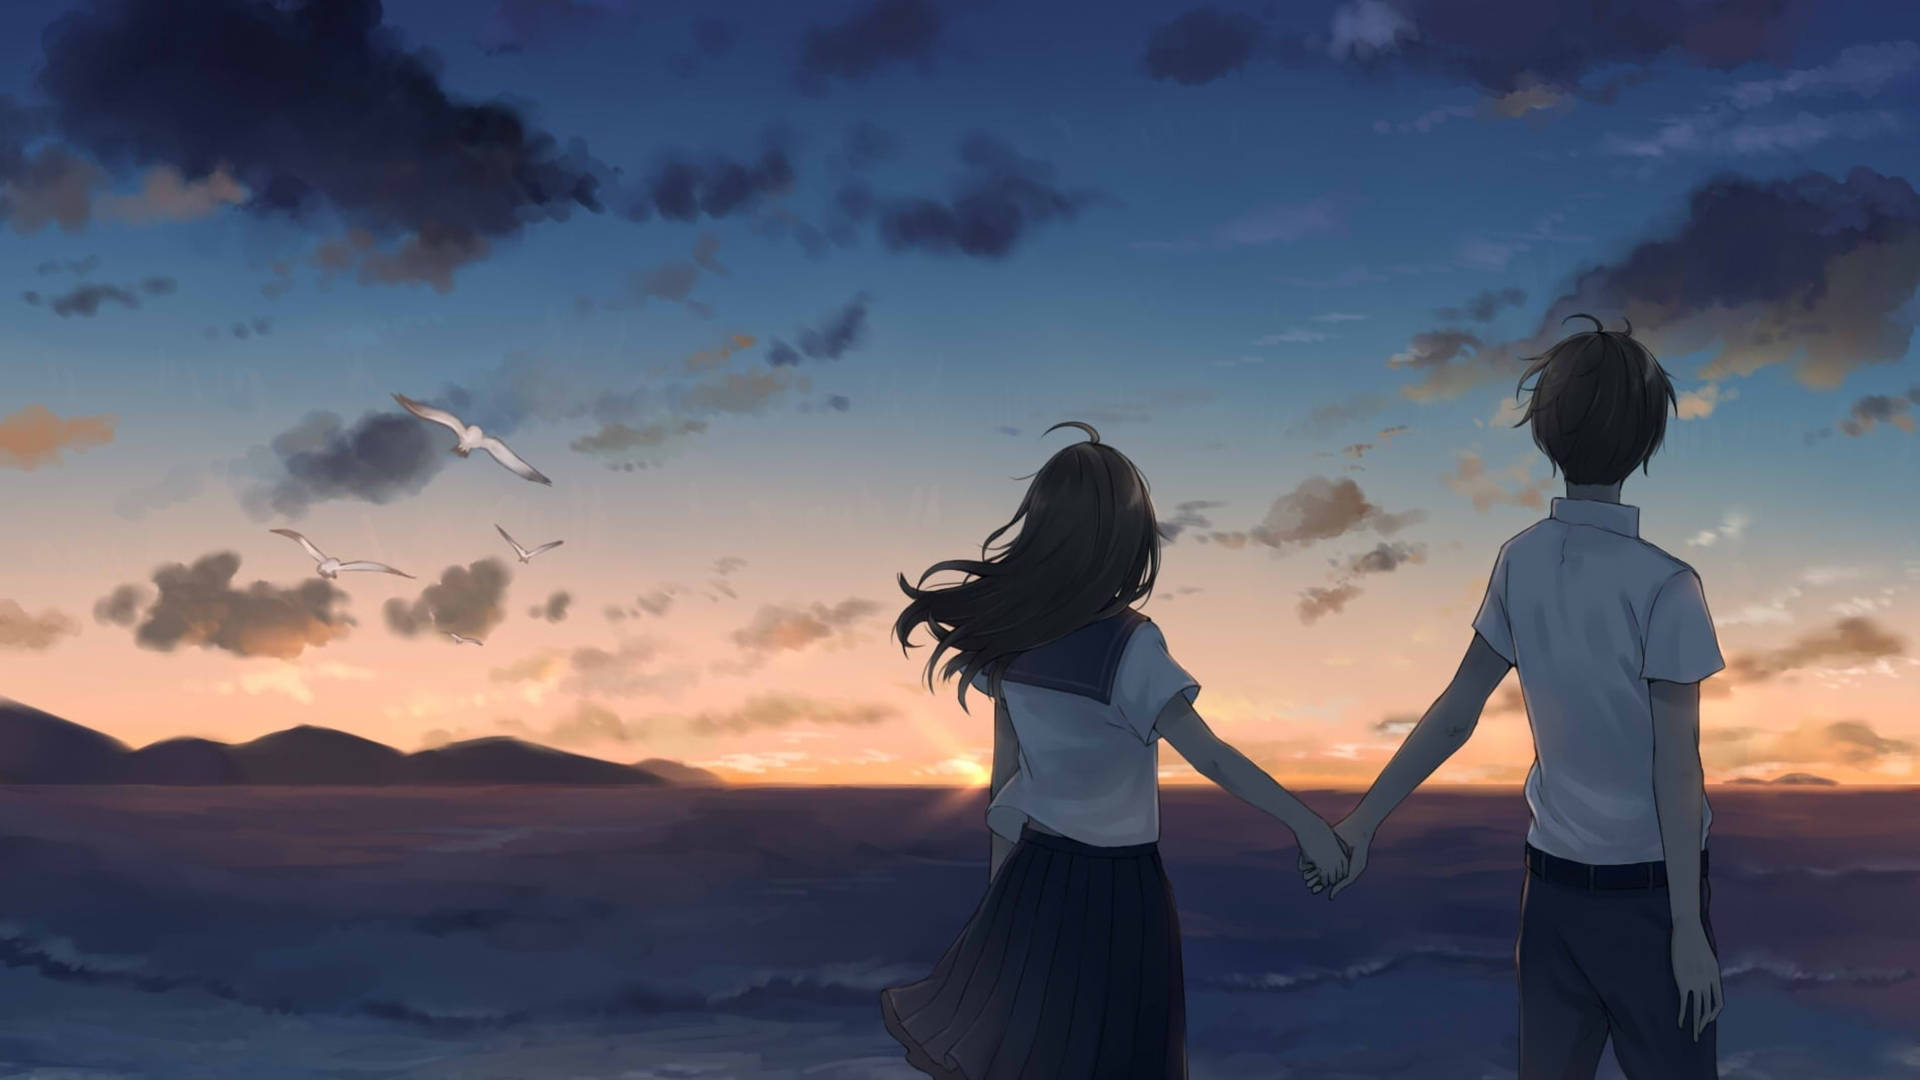 Cute Anime Couple Holding Hands Sunset